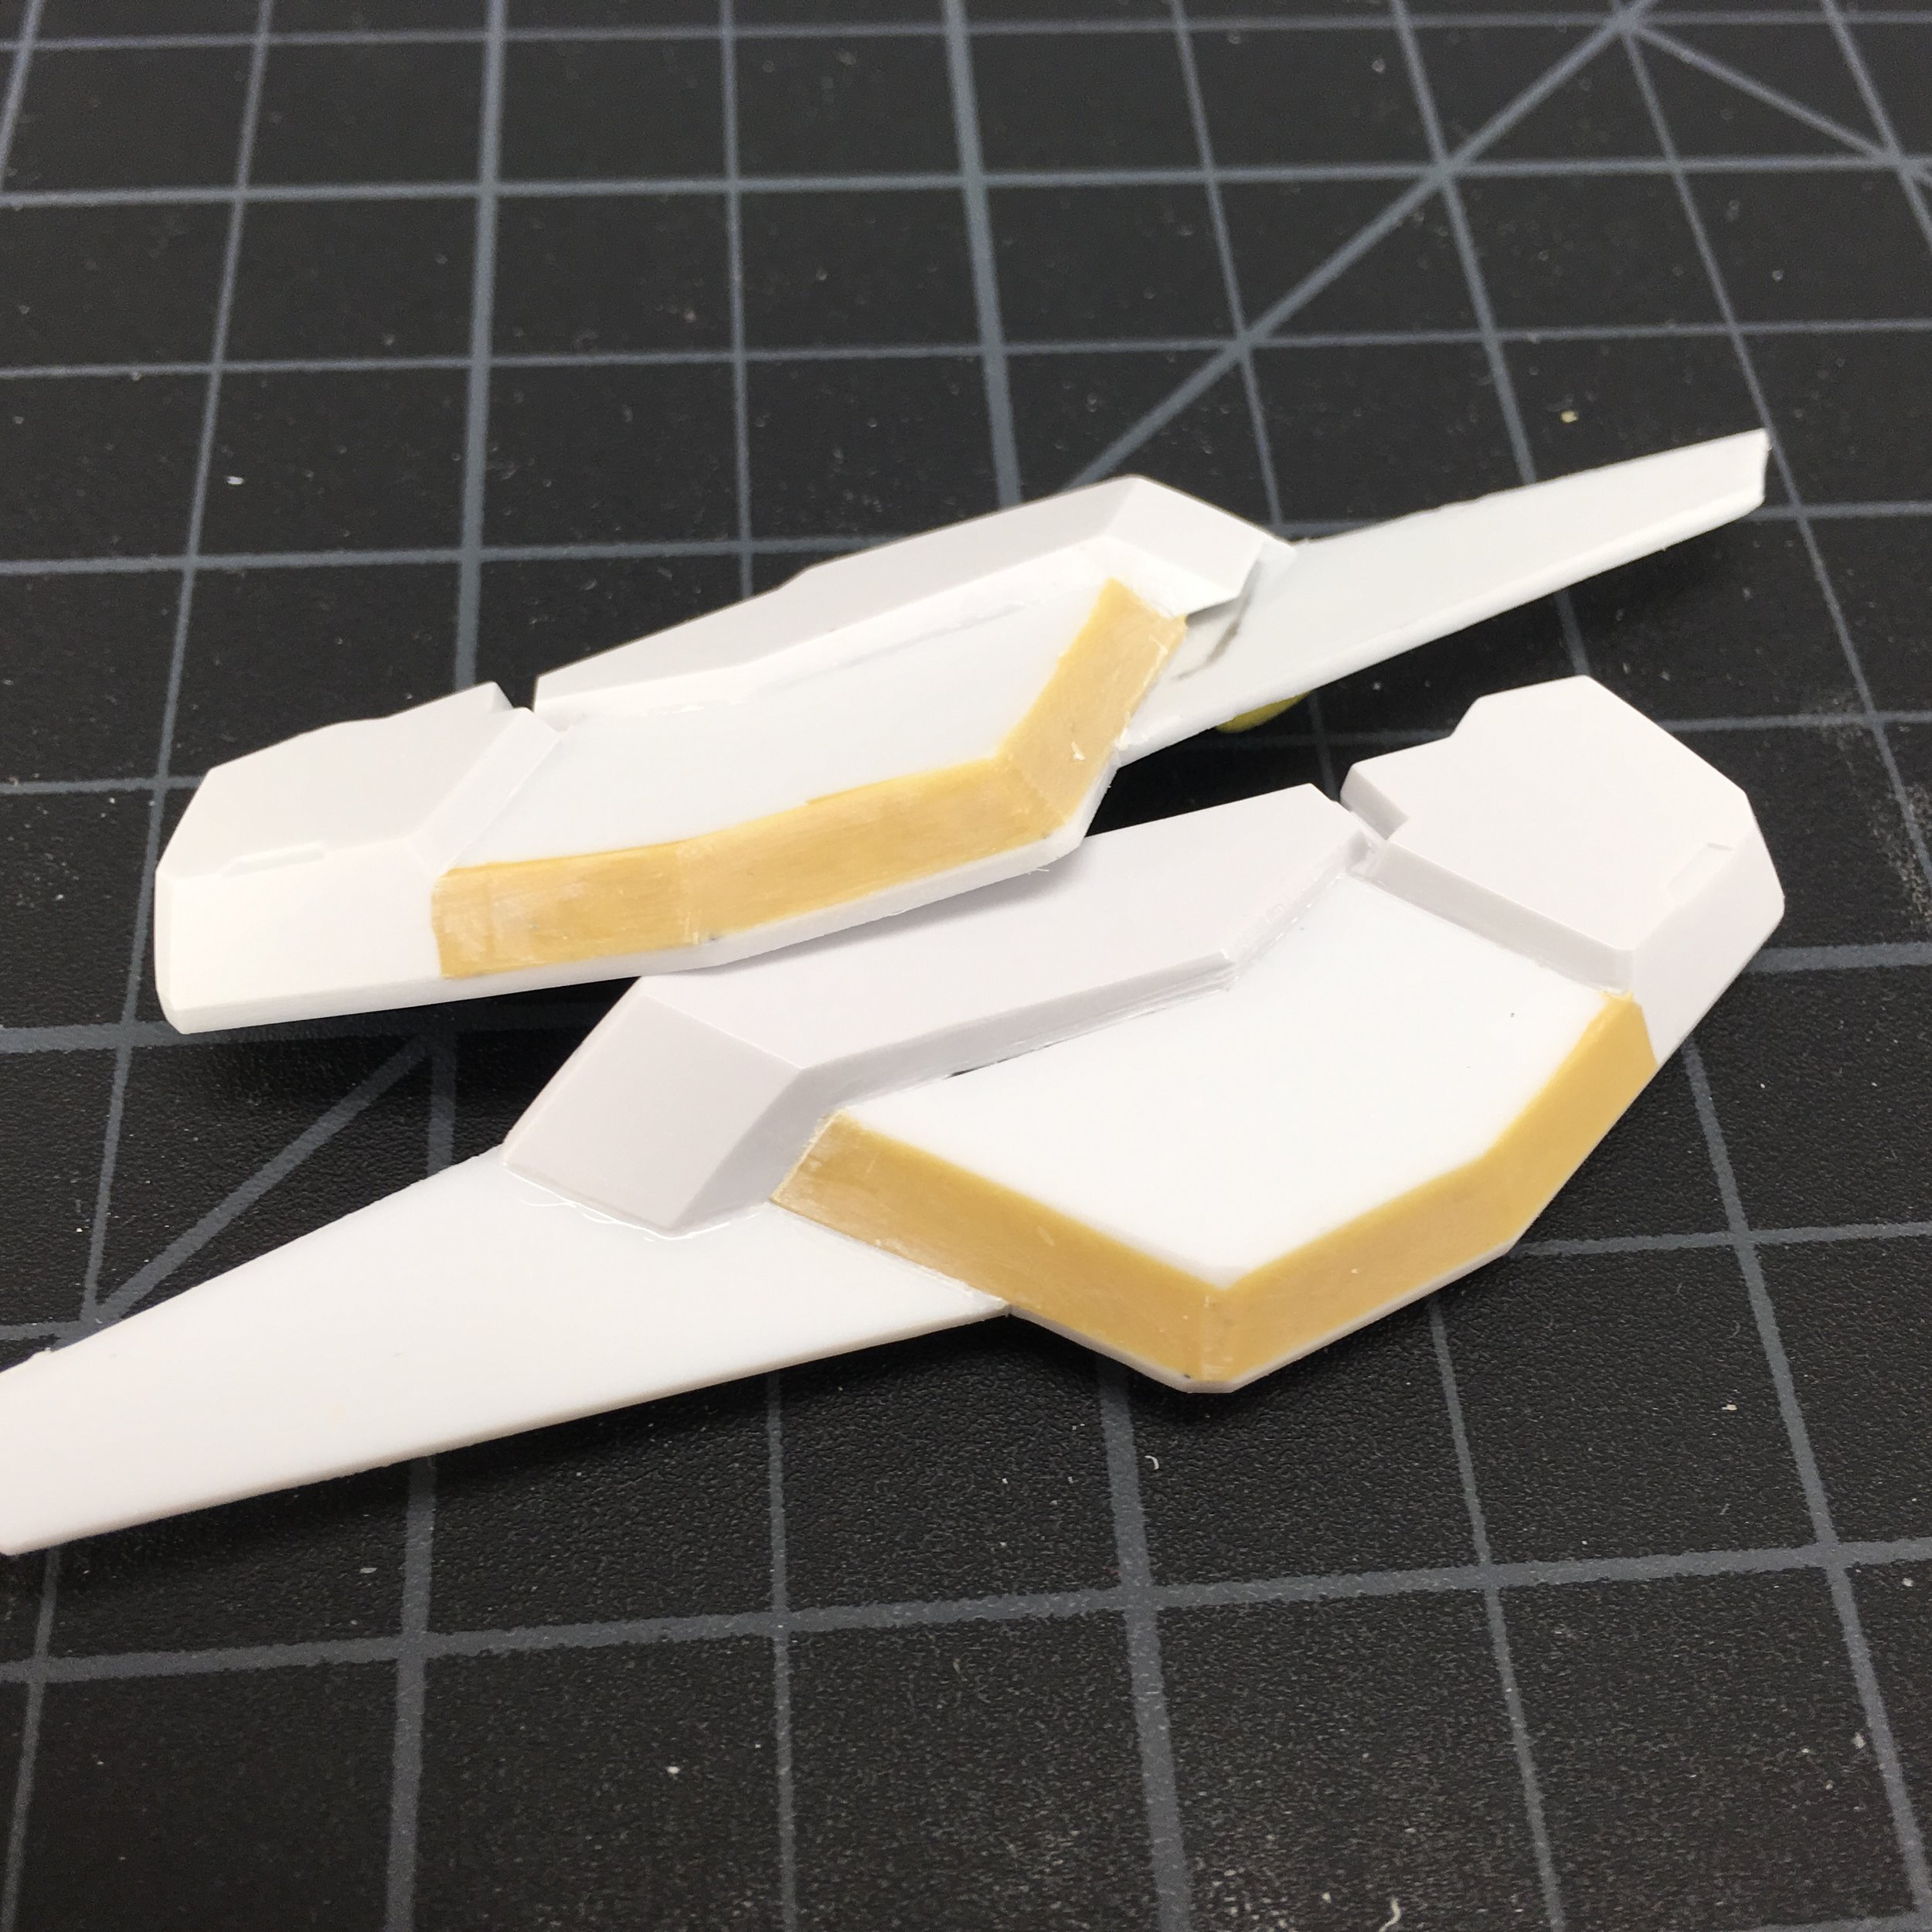 Using Tamiya putty to fill in lines and gaps : r/3Dprinting